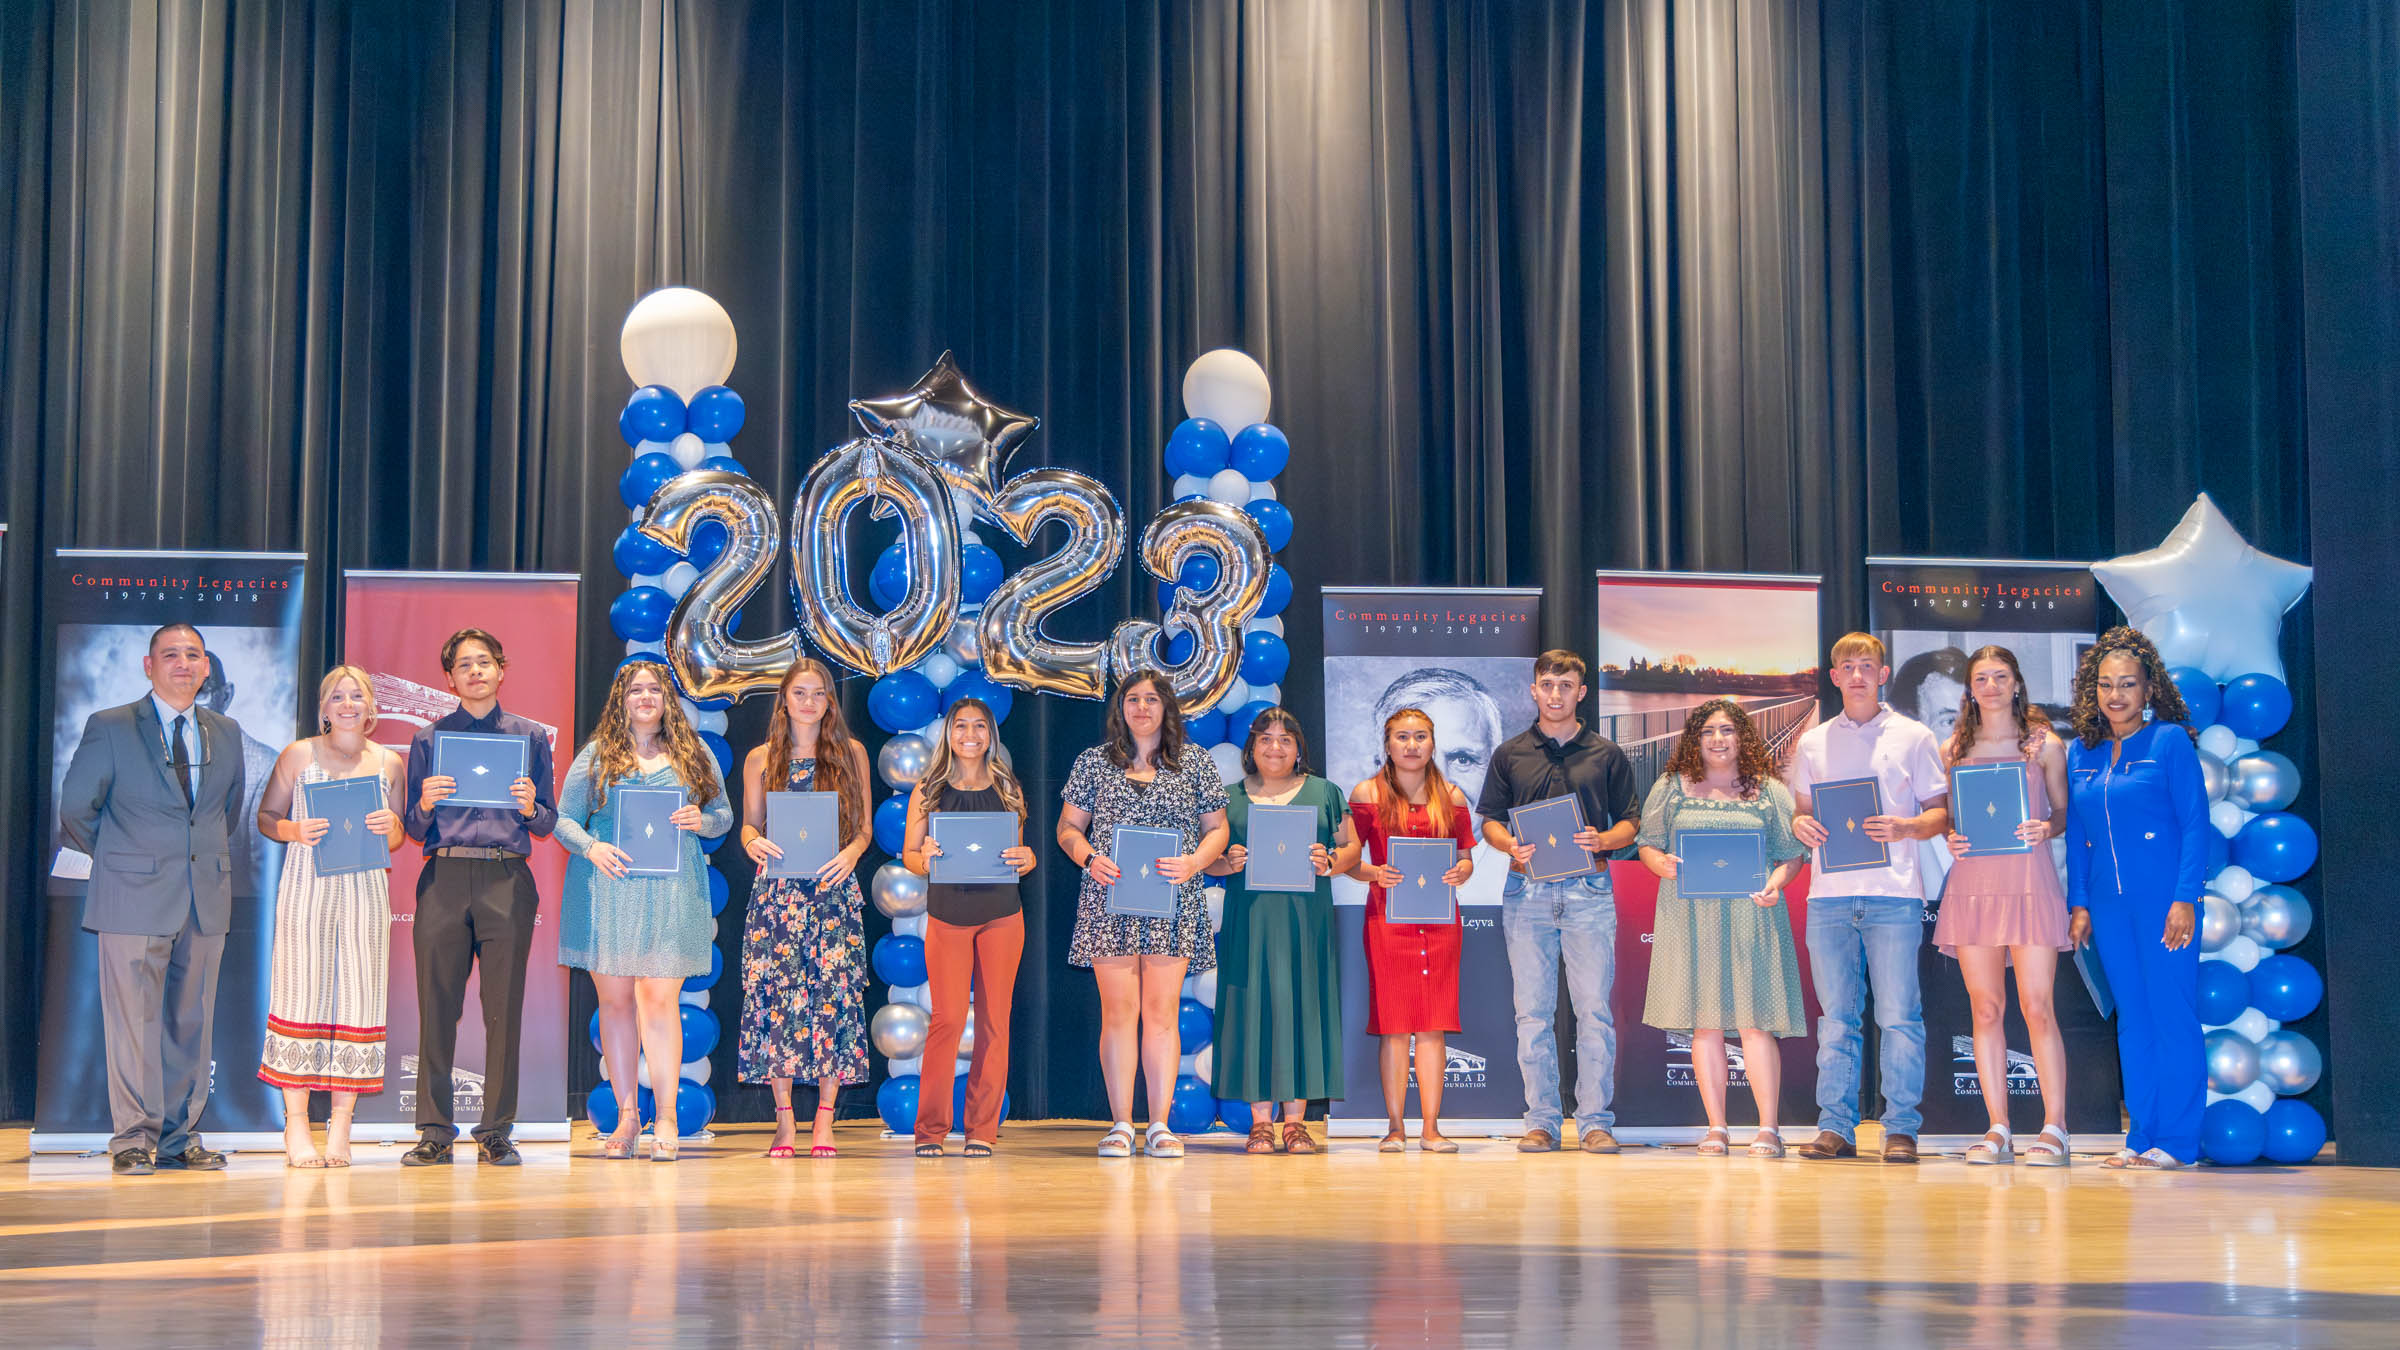 SIMCO awarded scholarships during the April 24, 2023 Carlsbad Municipal School District Scholarship Awards Ceremony.